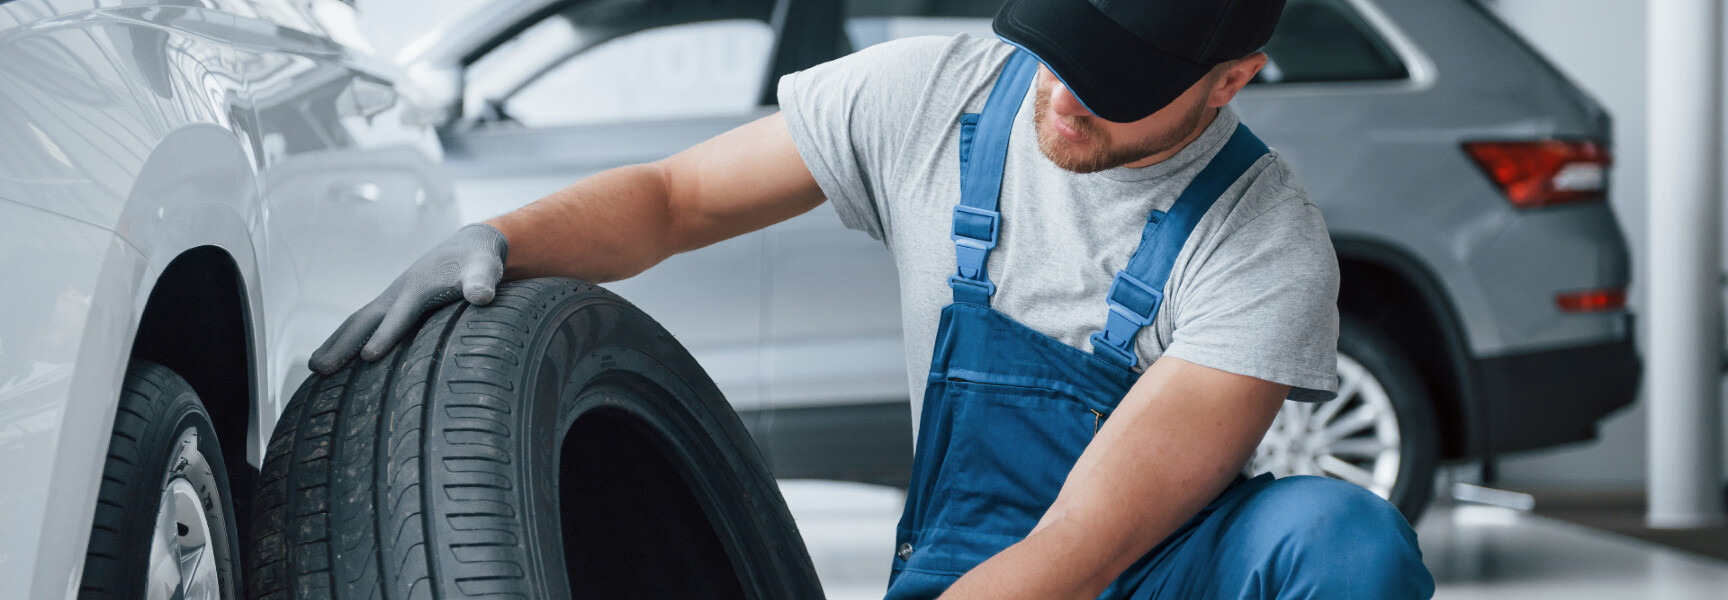 A close-up photo of a person replacing a car tire.